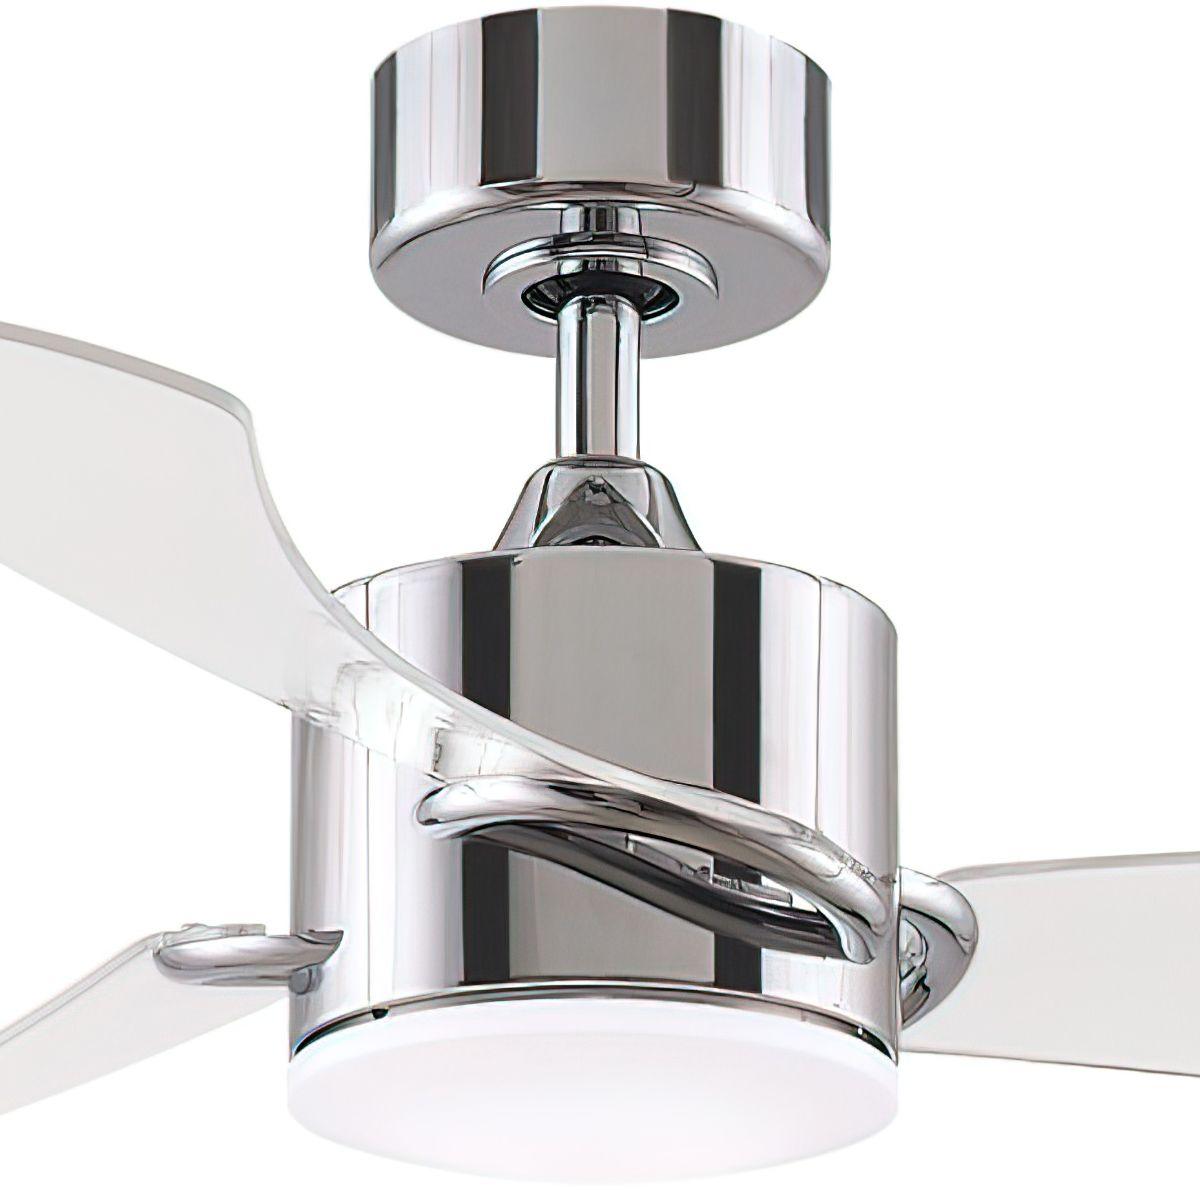 SculptAire 52 Inch Modern Indoor/Outdoor Ceiling Fan With Light And Remote